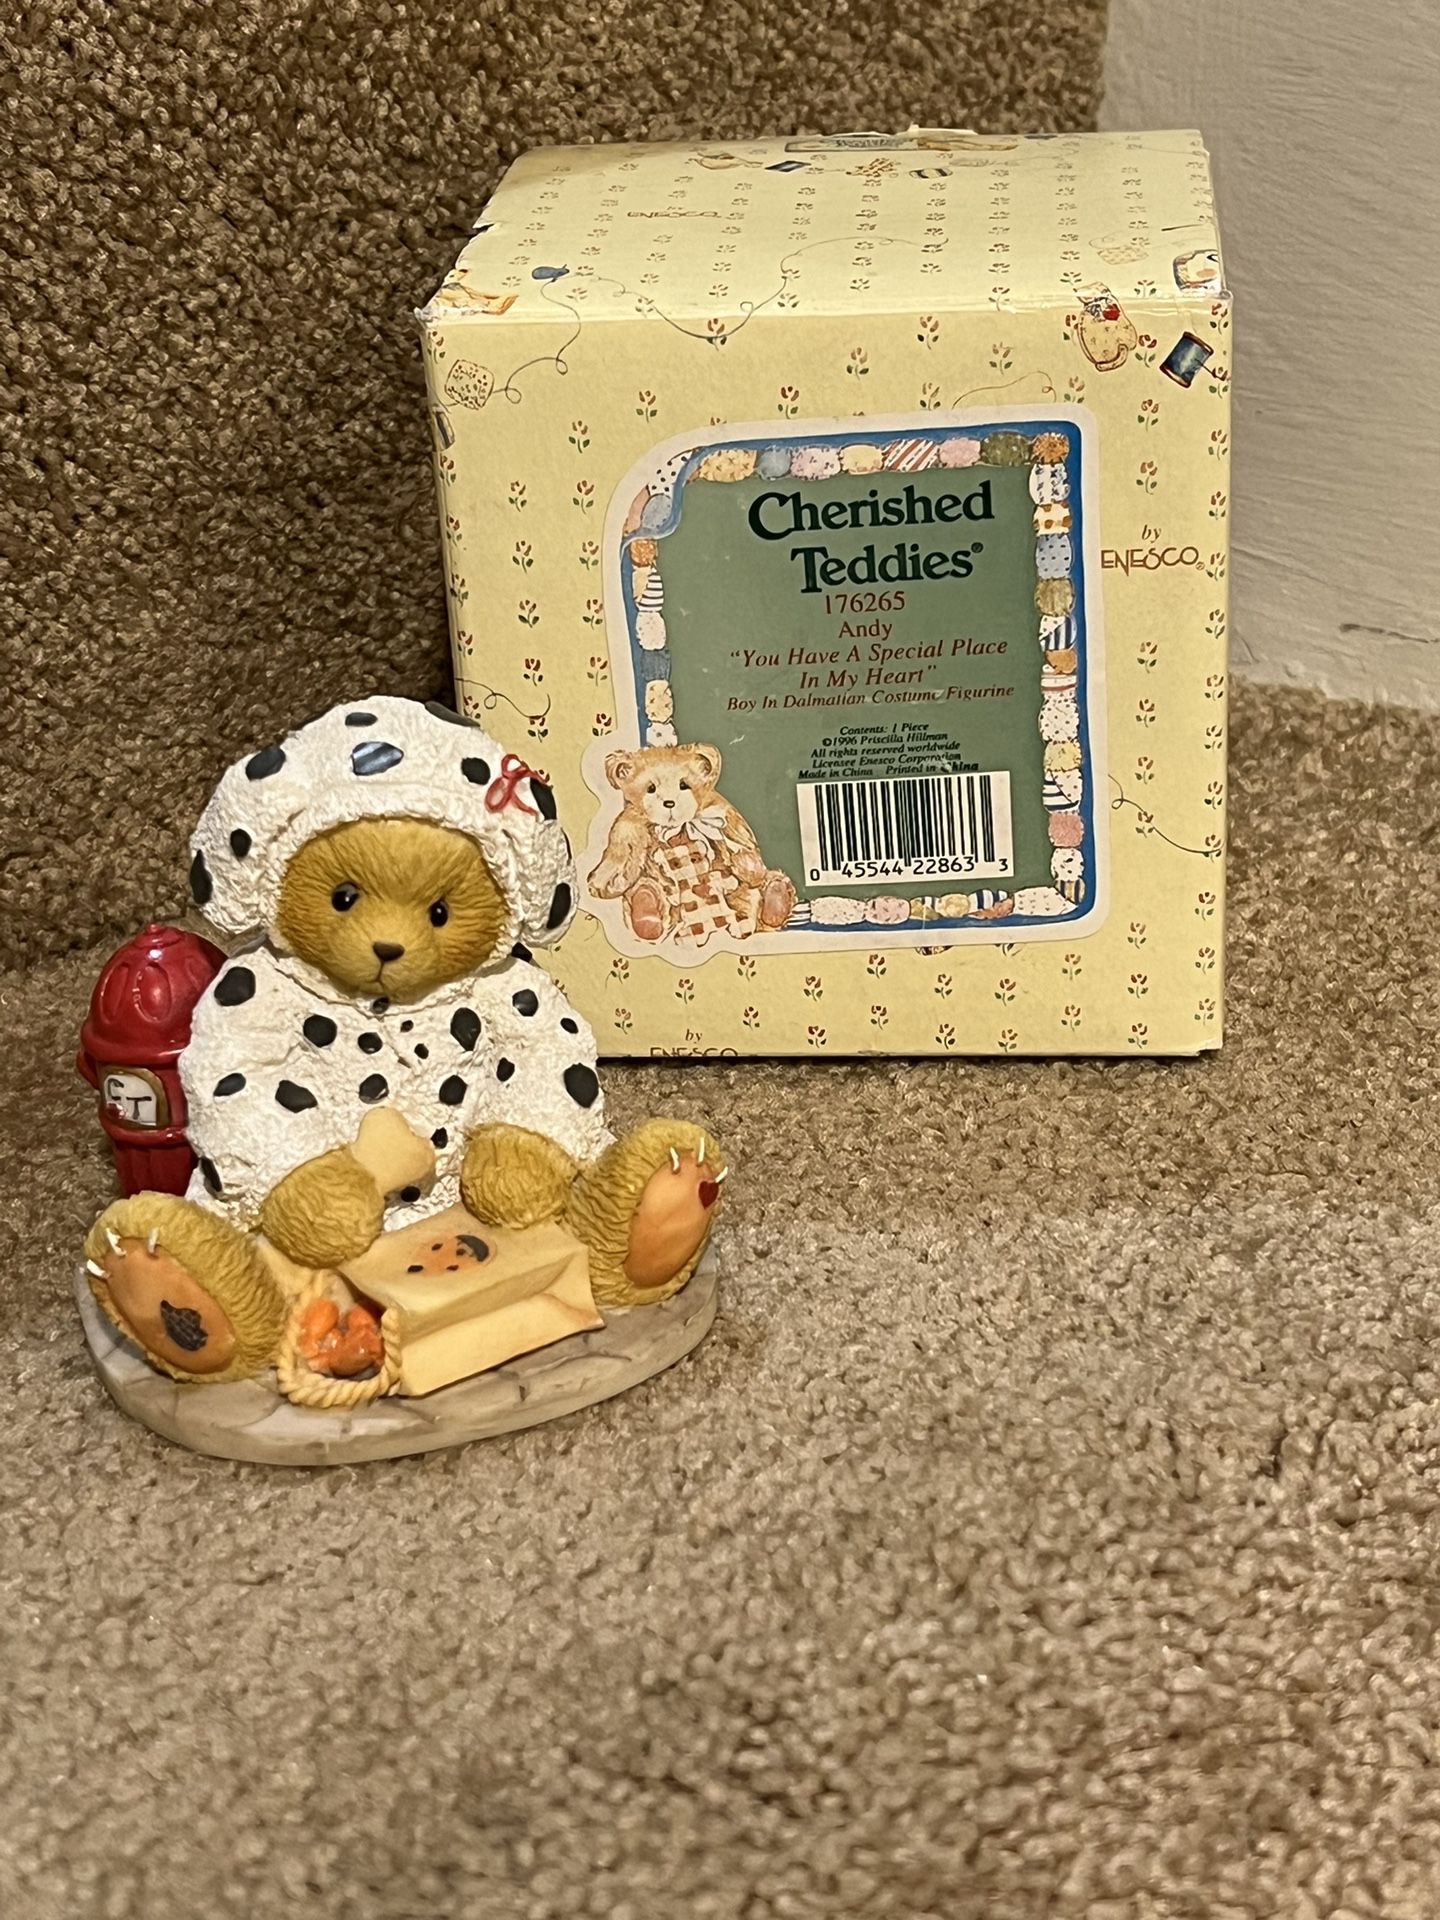 1996 Cherished Teddies Andy "You Have A Special Place In My Heart" Enesco 176265